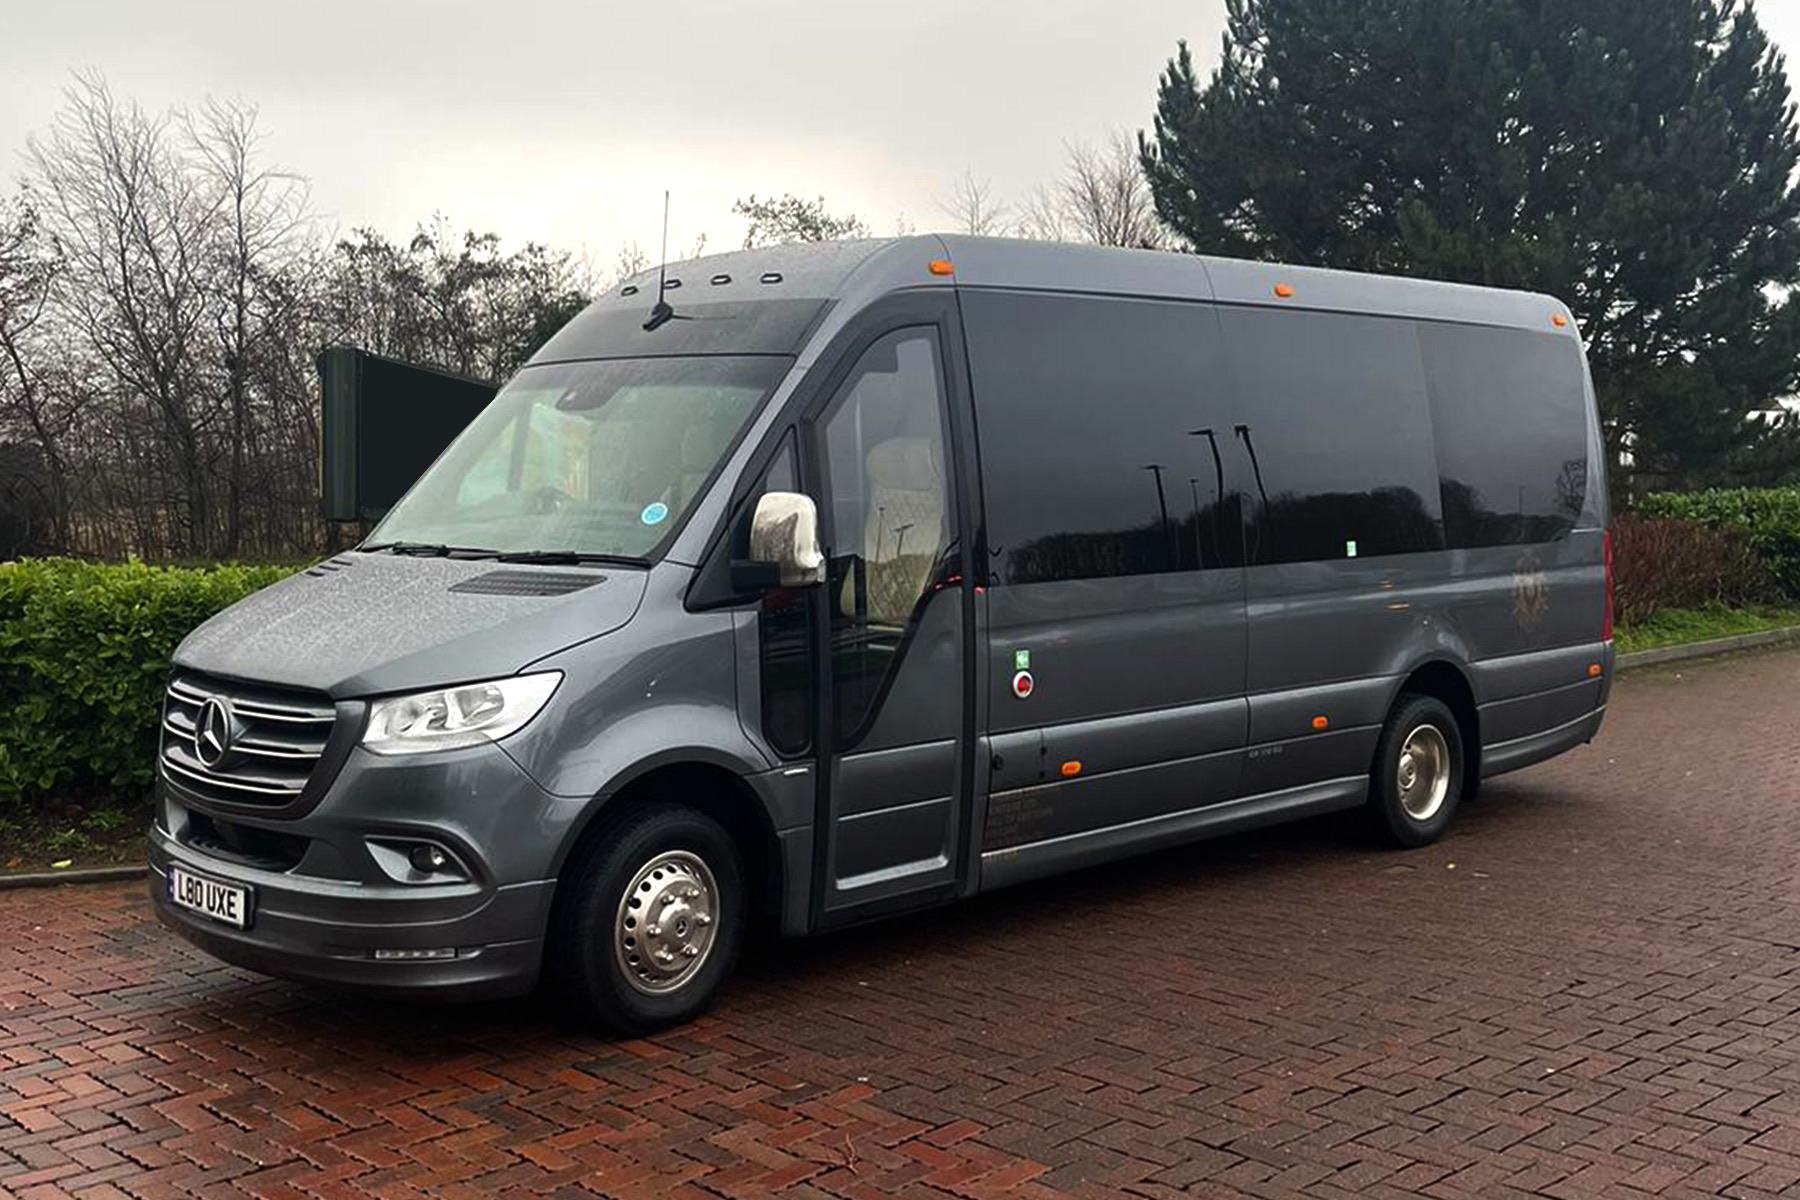 Discover the Top Benefits of Choosing Minibus Hire for Group Travel in the UK